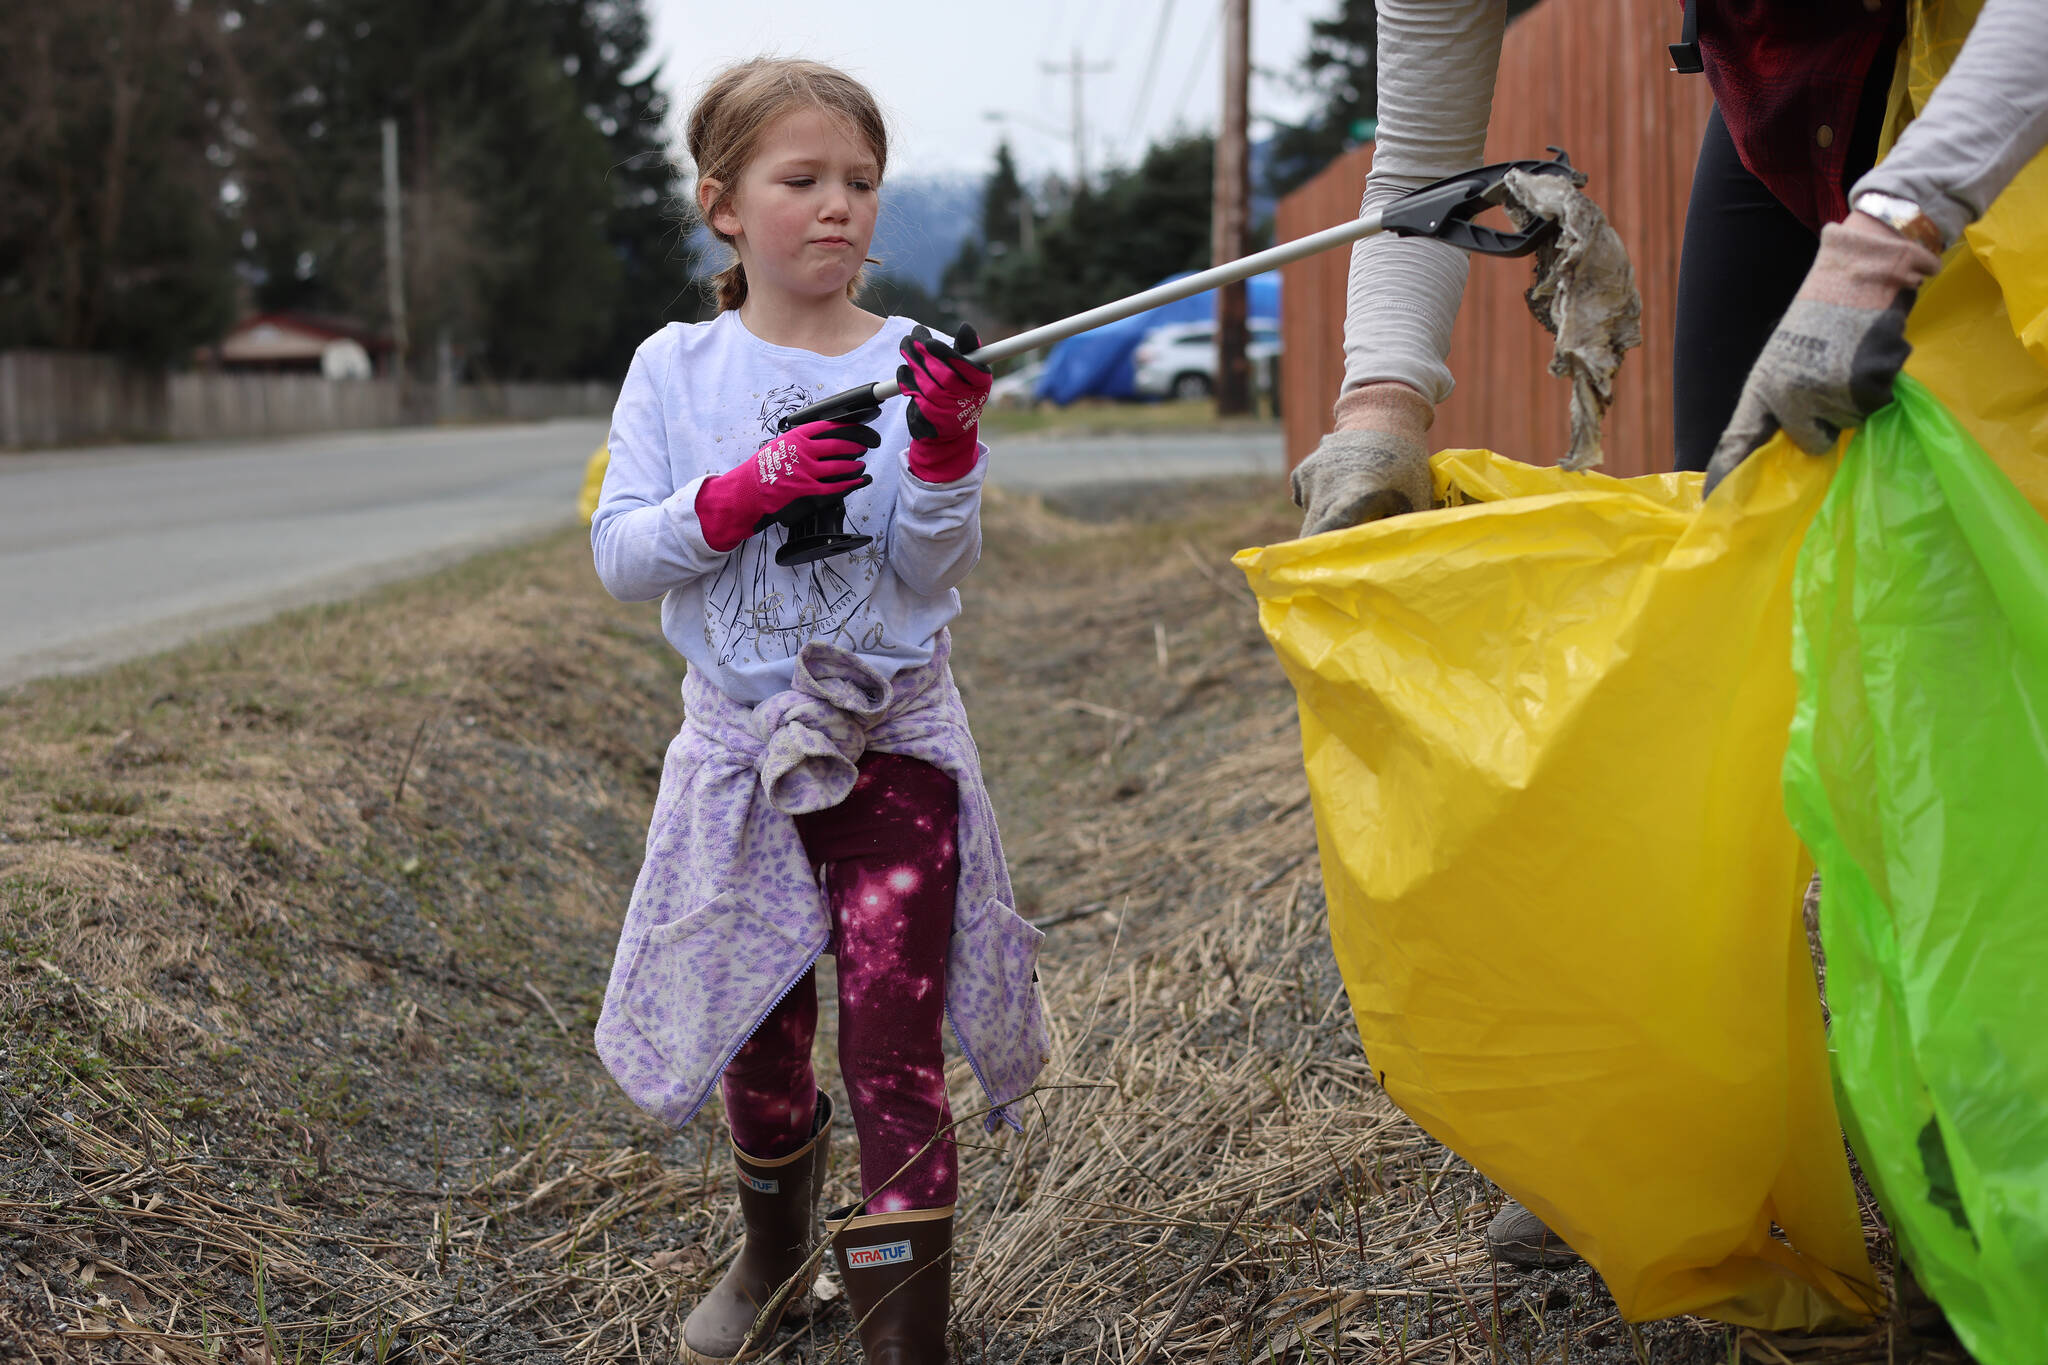 Catherine Berry, 6, places litter in a bag held open by her mother, Mary, during a communitywide cleanup held on Earth Day. The cleanup of public lands is an annual event organized by Litter Free Inc. (Ben Hohenstatt / Juneau Empire)